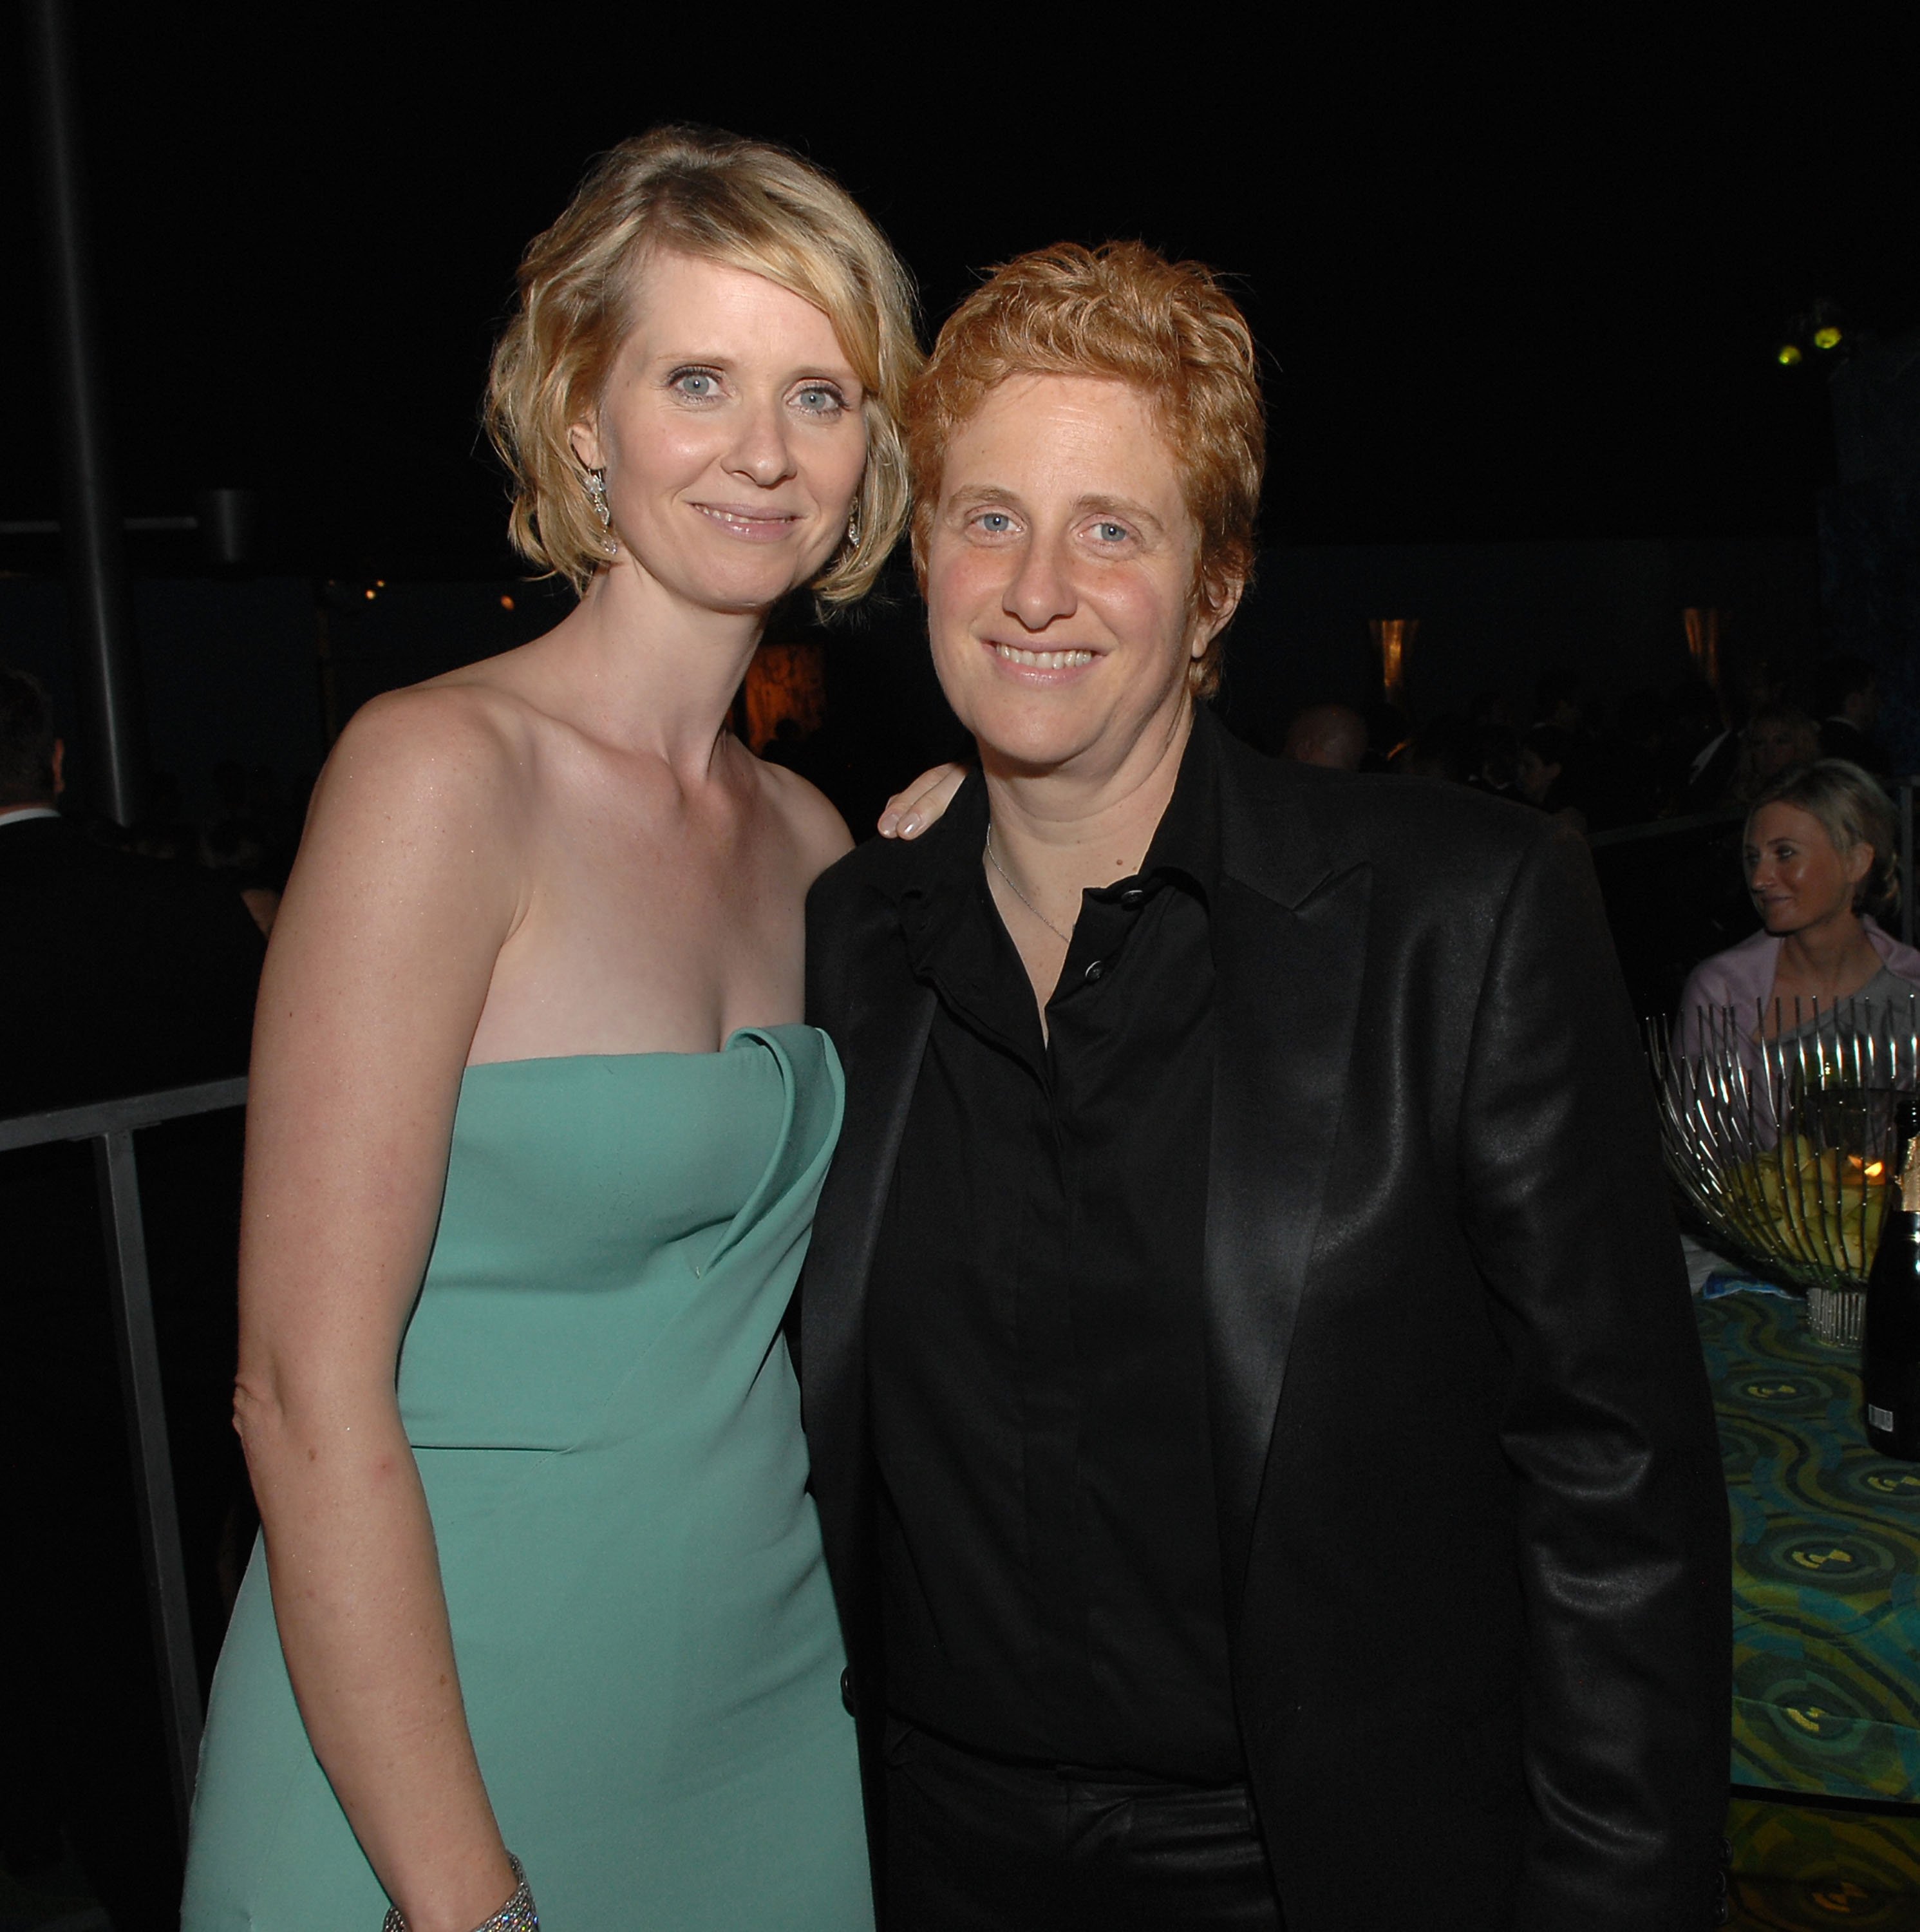 Cynthia Nixon (L) and partner Christine Mariononi attend HBO's Post Primetime Emmy Awards Reception at the Pacific Design Center on September 21, 2008, in Los Angeles, California. | Source: Getty Images.